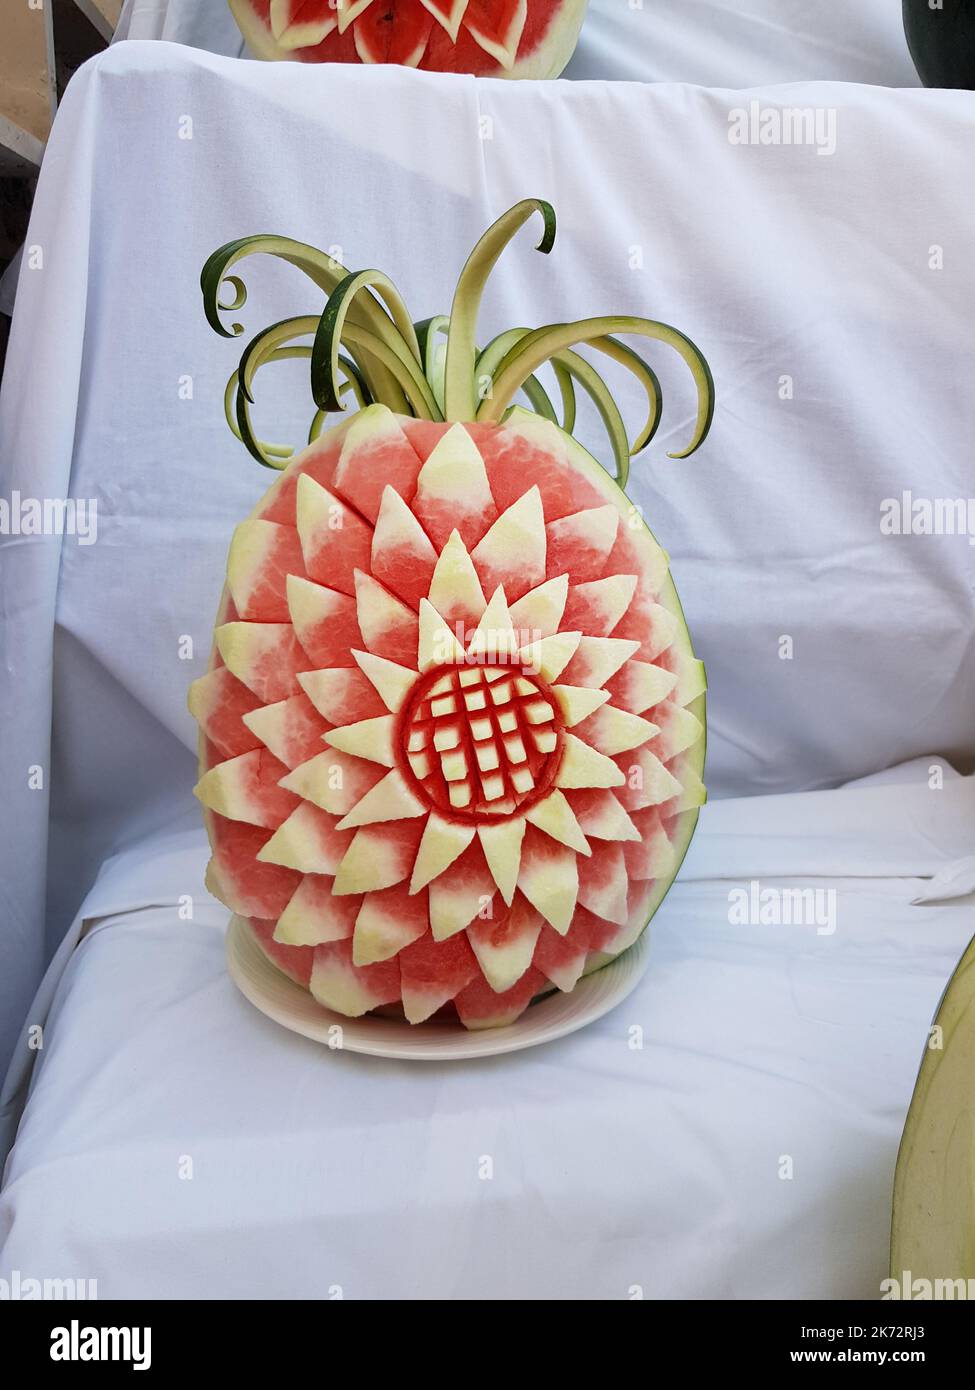 Large fresh watermelon with carved decorations on the counter. Decorative watermelon carving. Fruit cutting art Stock Photo